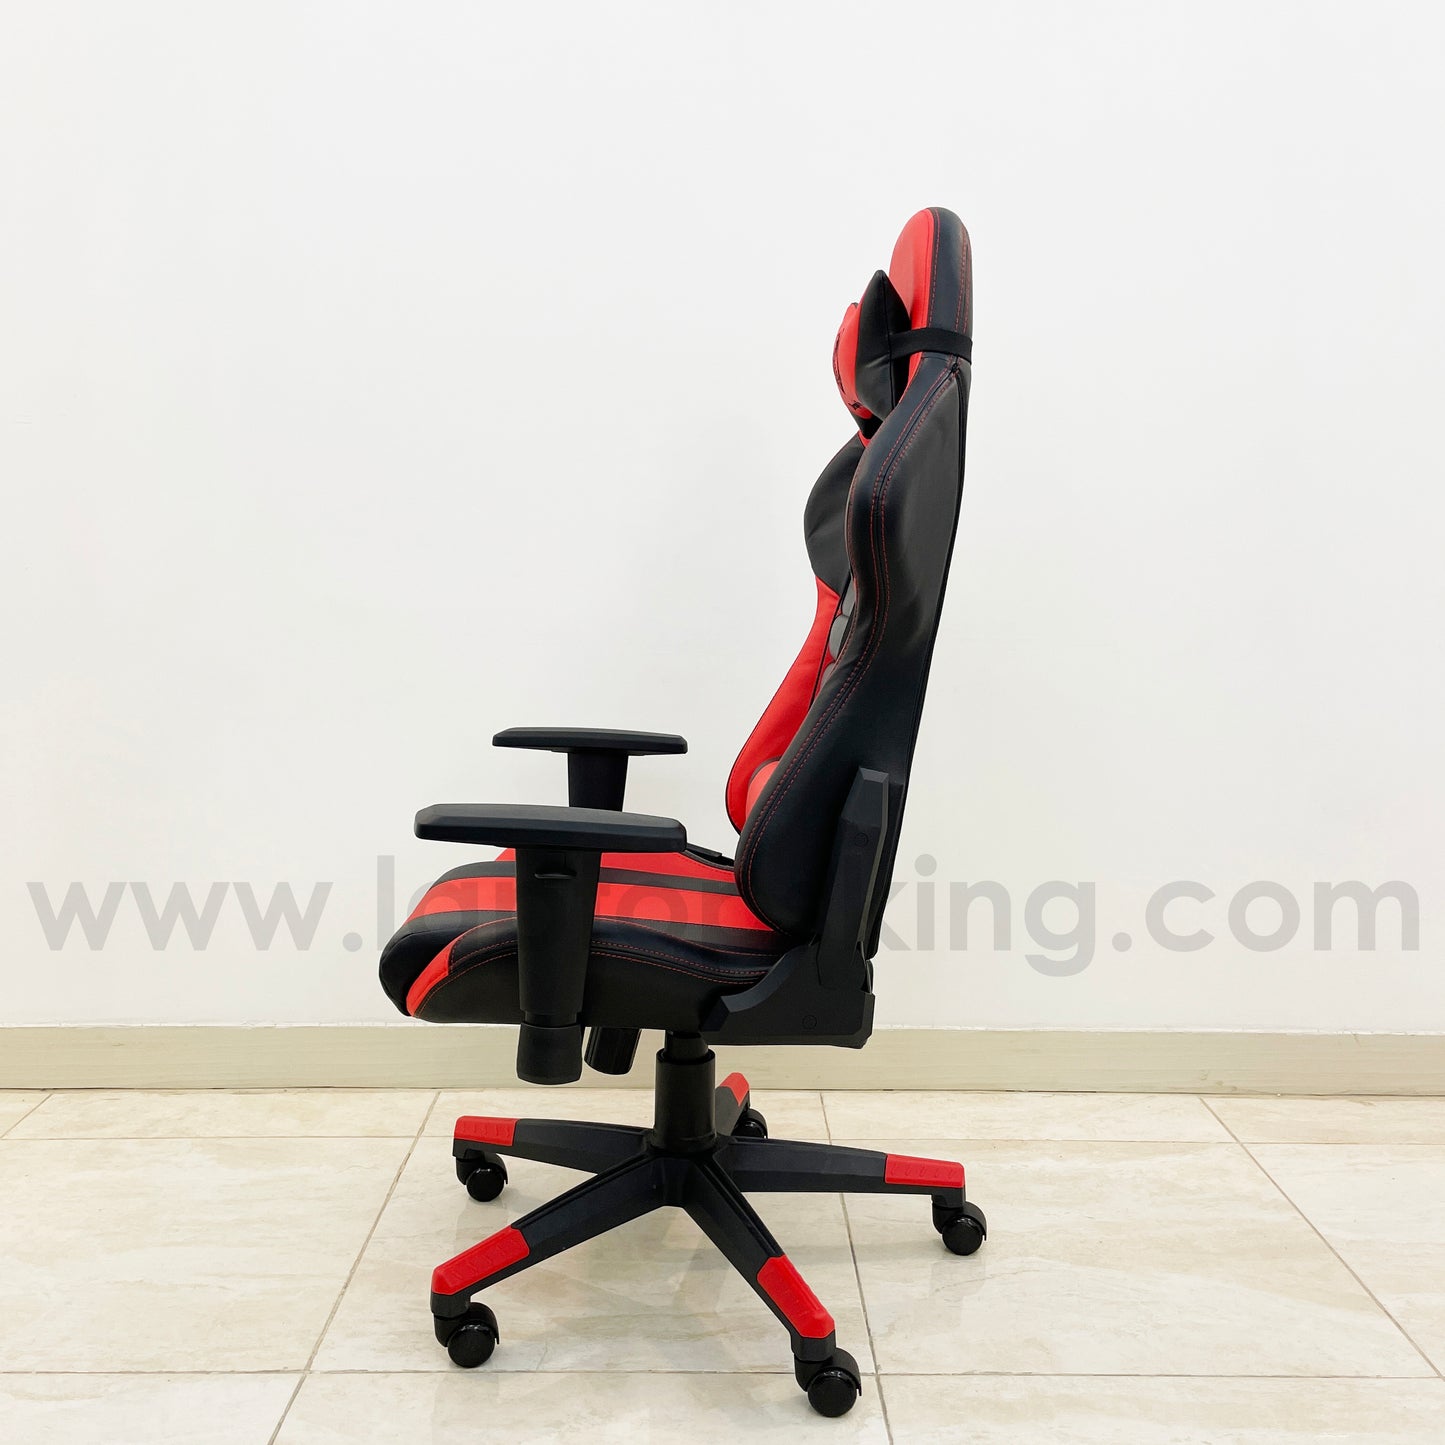 Dragon War GM-407 Colors High Quality Gaming Chair Offers (Brand New)